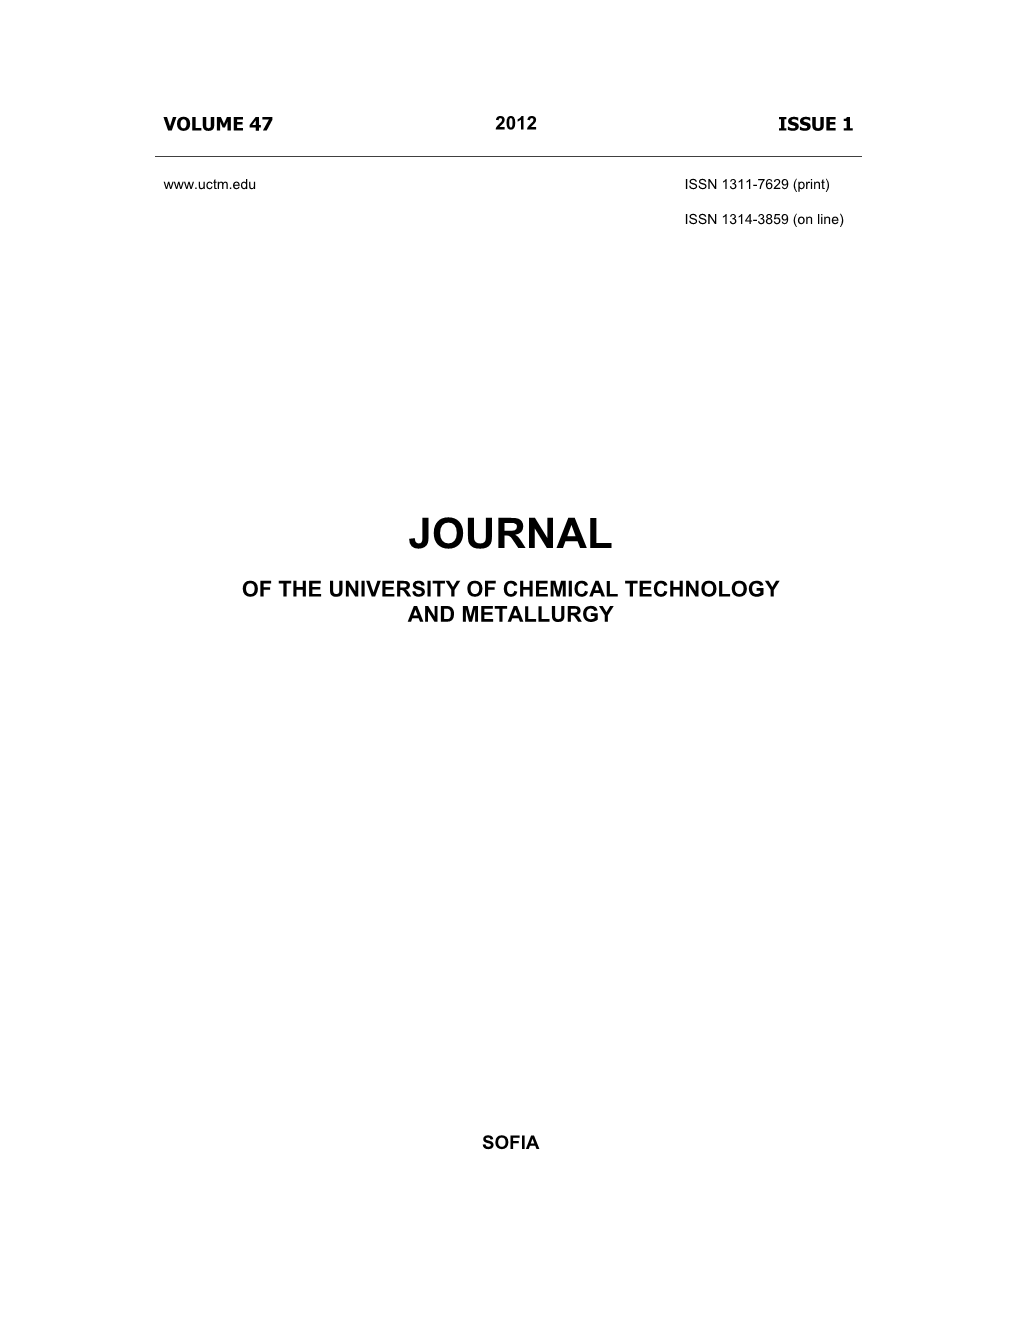 Journal of Chemical Technology and Metallurgy